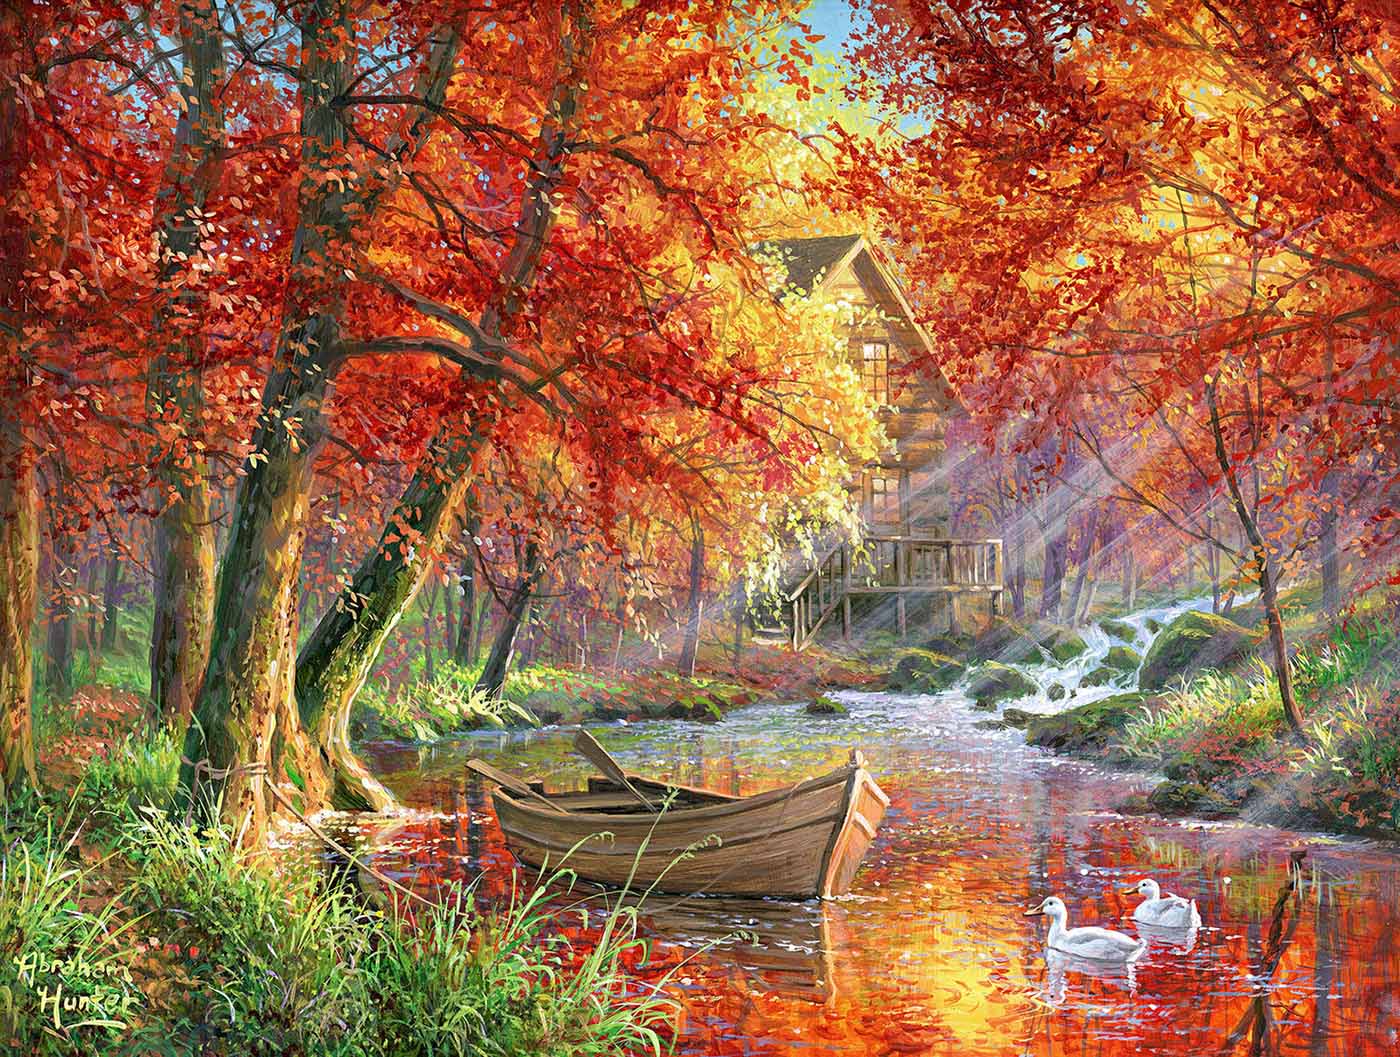 Vibrant Morning - Scratch and Dent Fall Jigsaw Puzzle